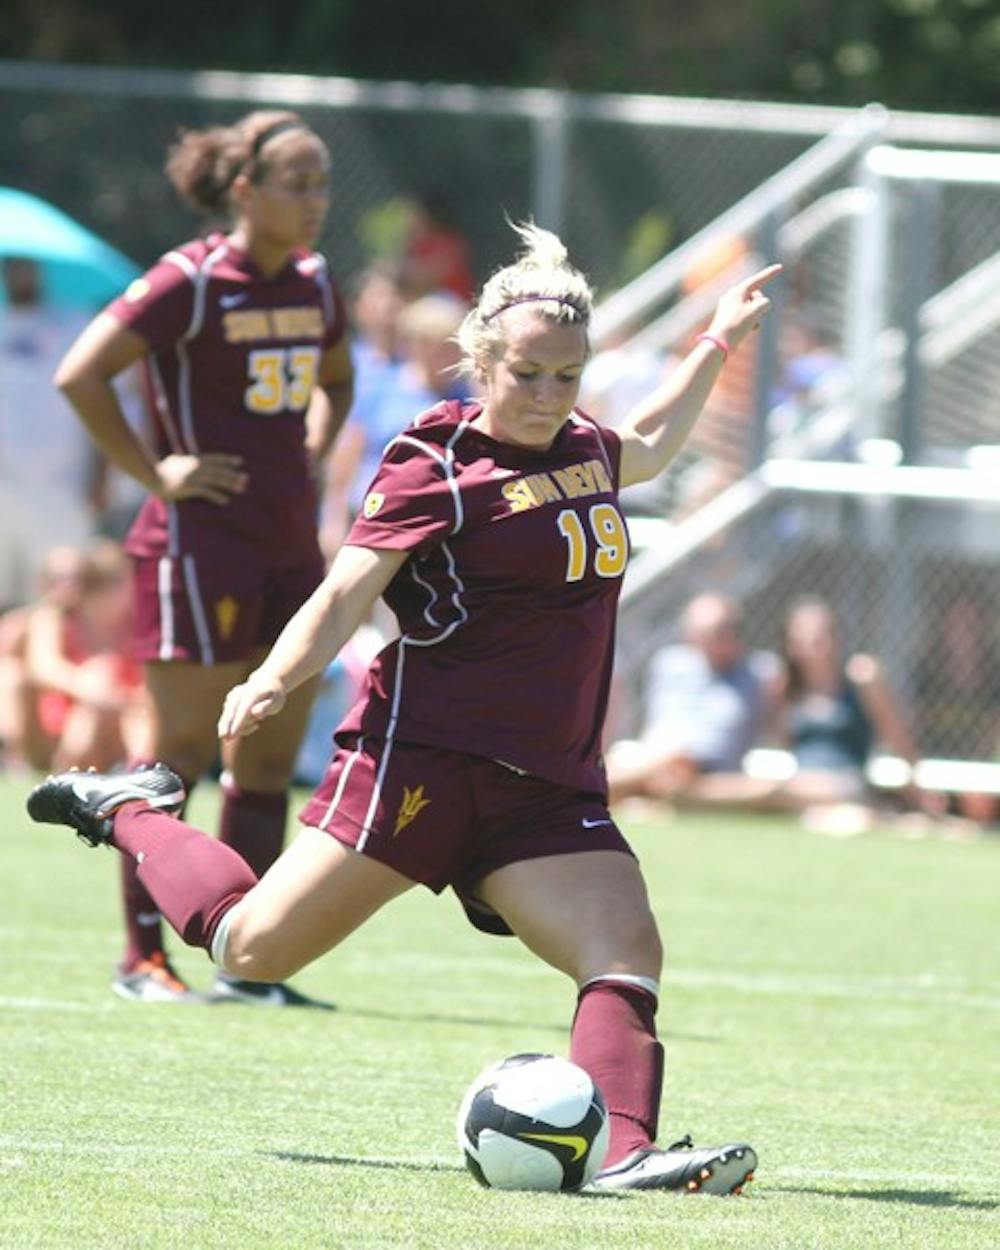 OPENING NIGHT: ASU senior defender Kari Shane launches a ball downfield during a Saturday exhibition game against Boise State University. The Sun Devils open the 2011 campaign at home against NAU on Friday. (Courtesy of Steve Rodriguez)